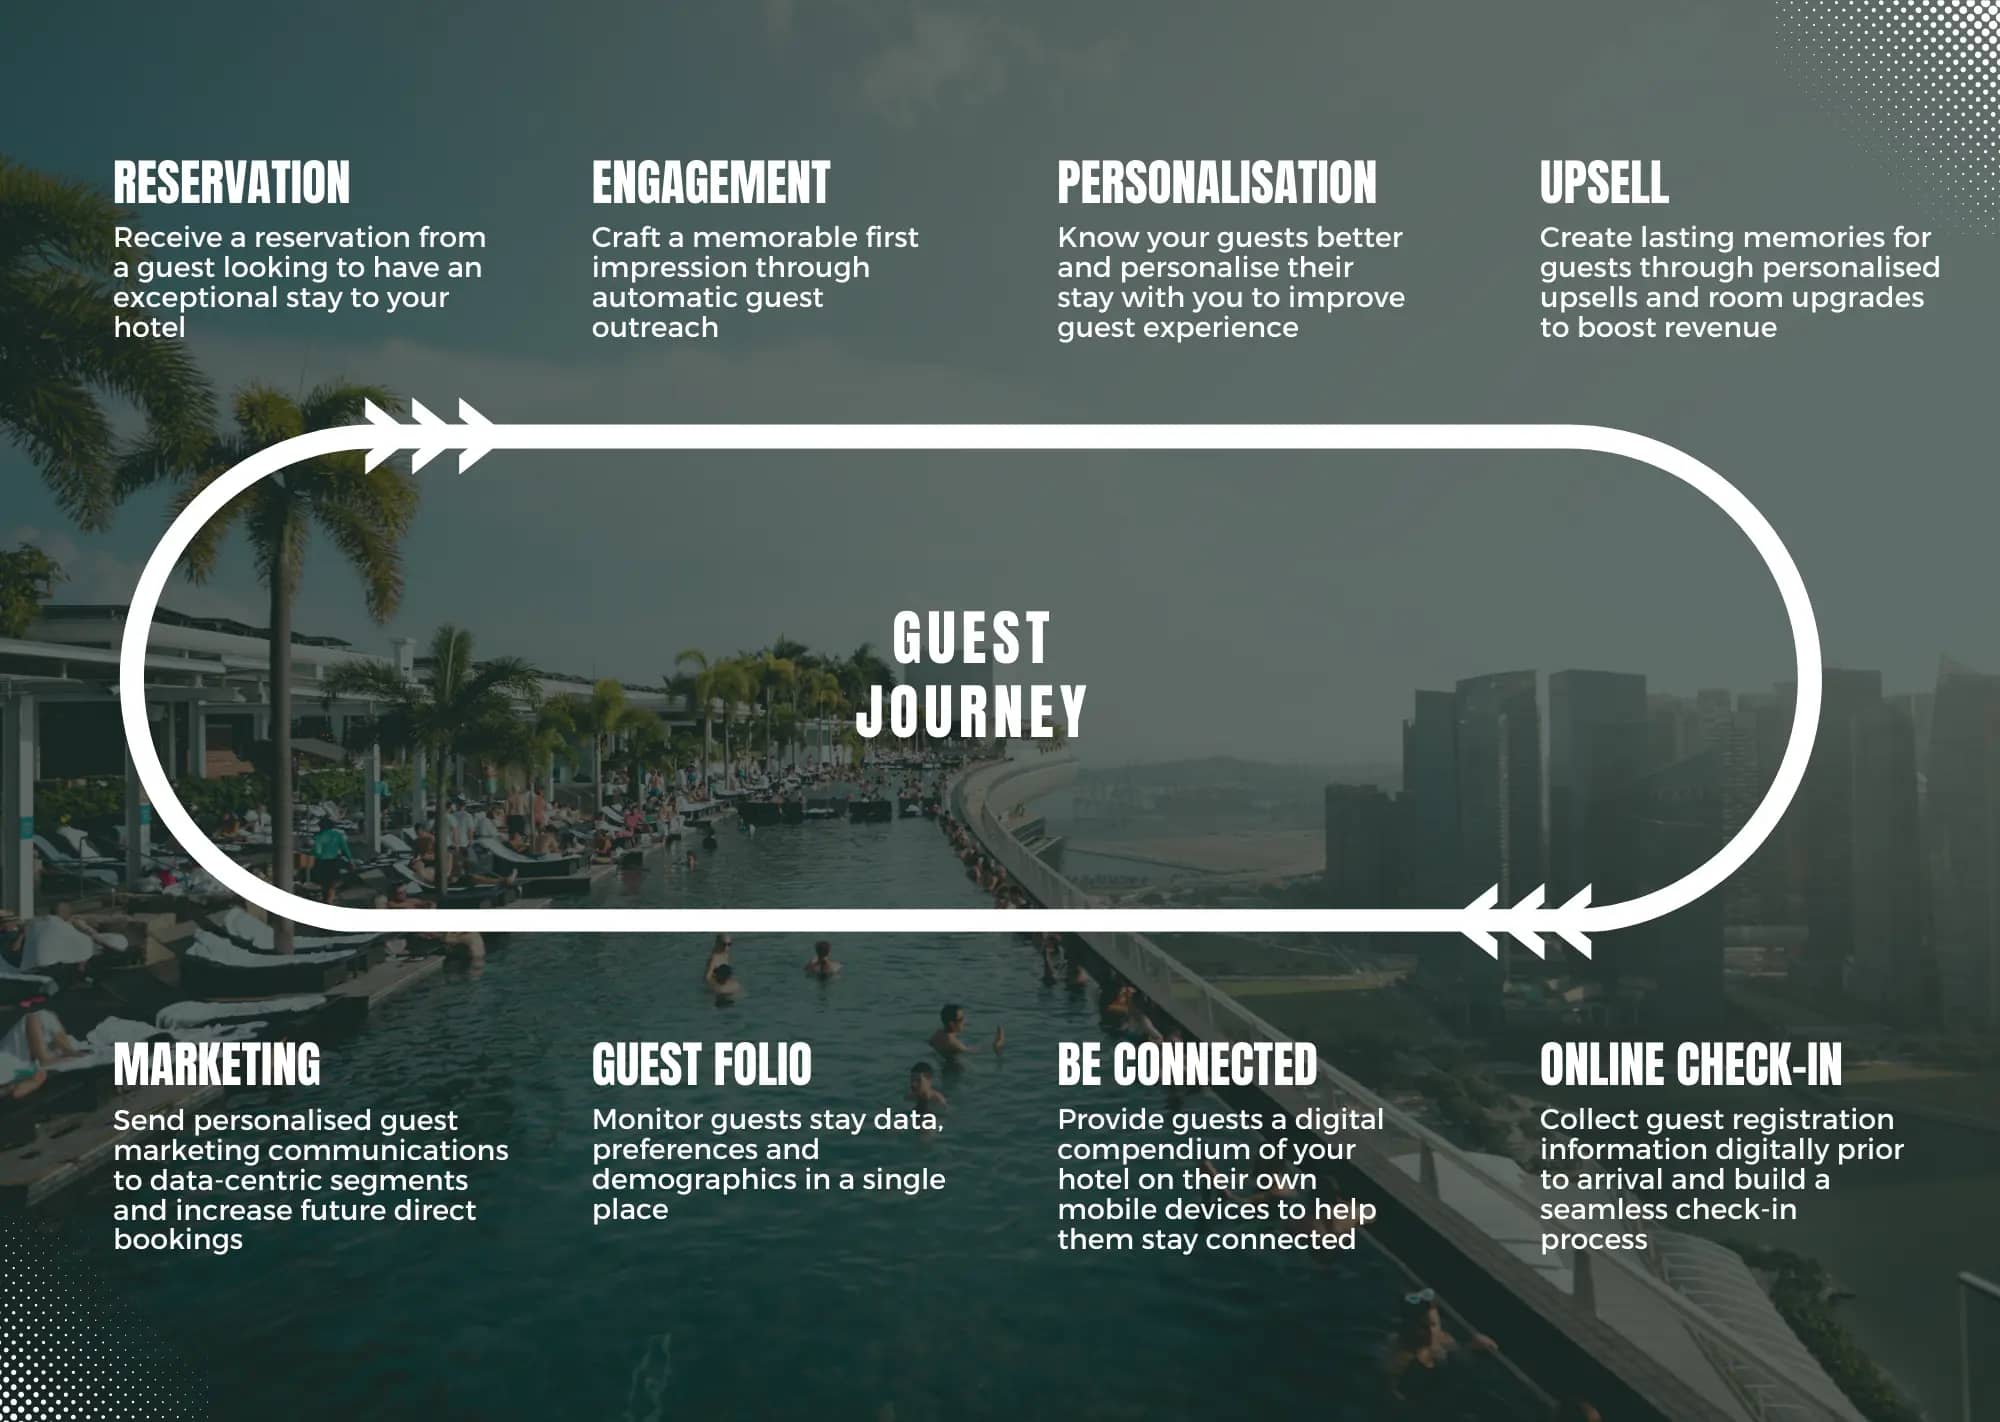 Guest Journey Lifecycle - Stages that the guest go through throughout their entire stay at your hotel